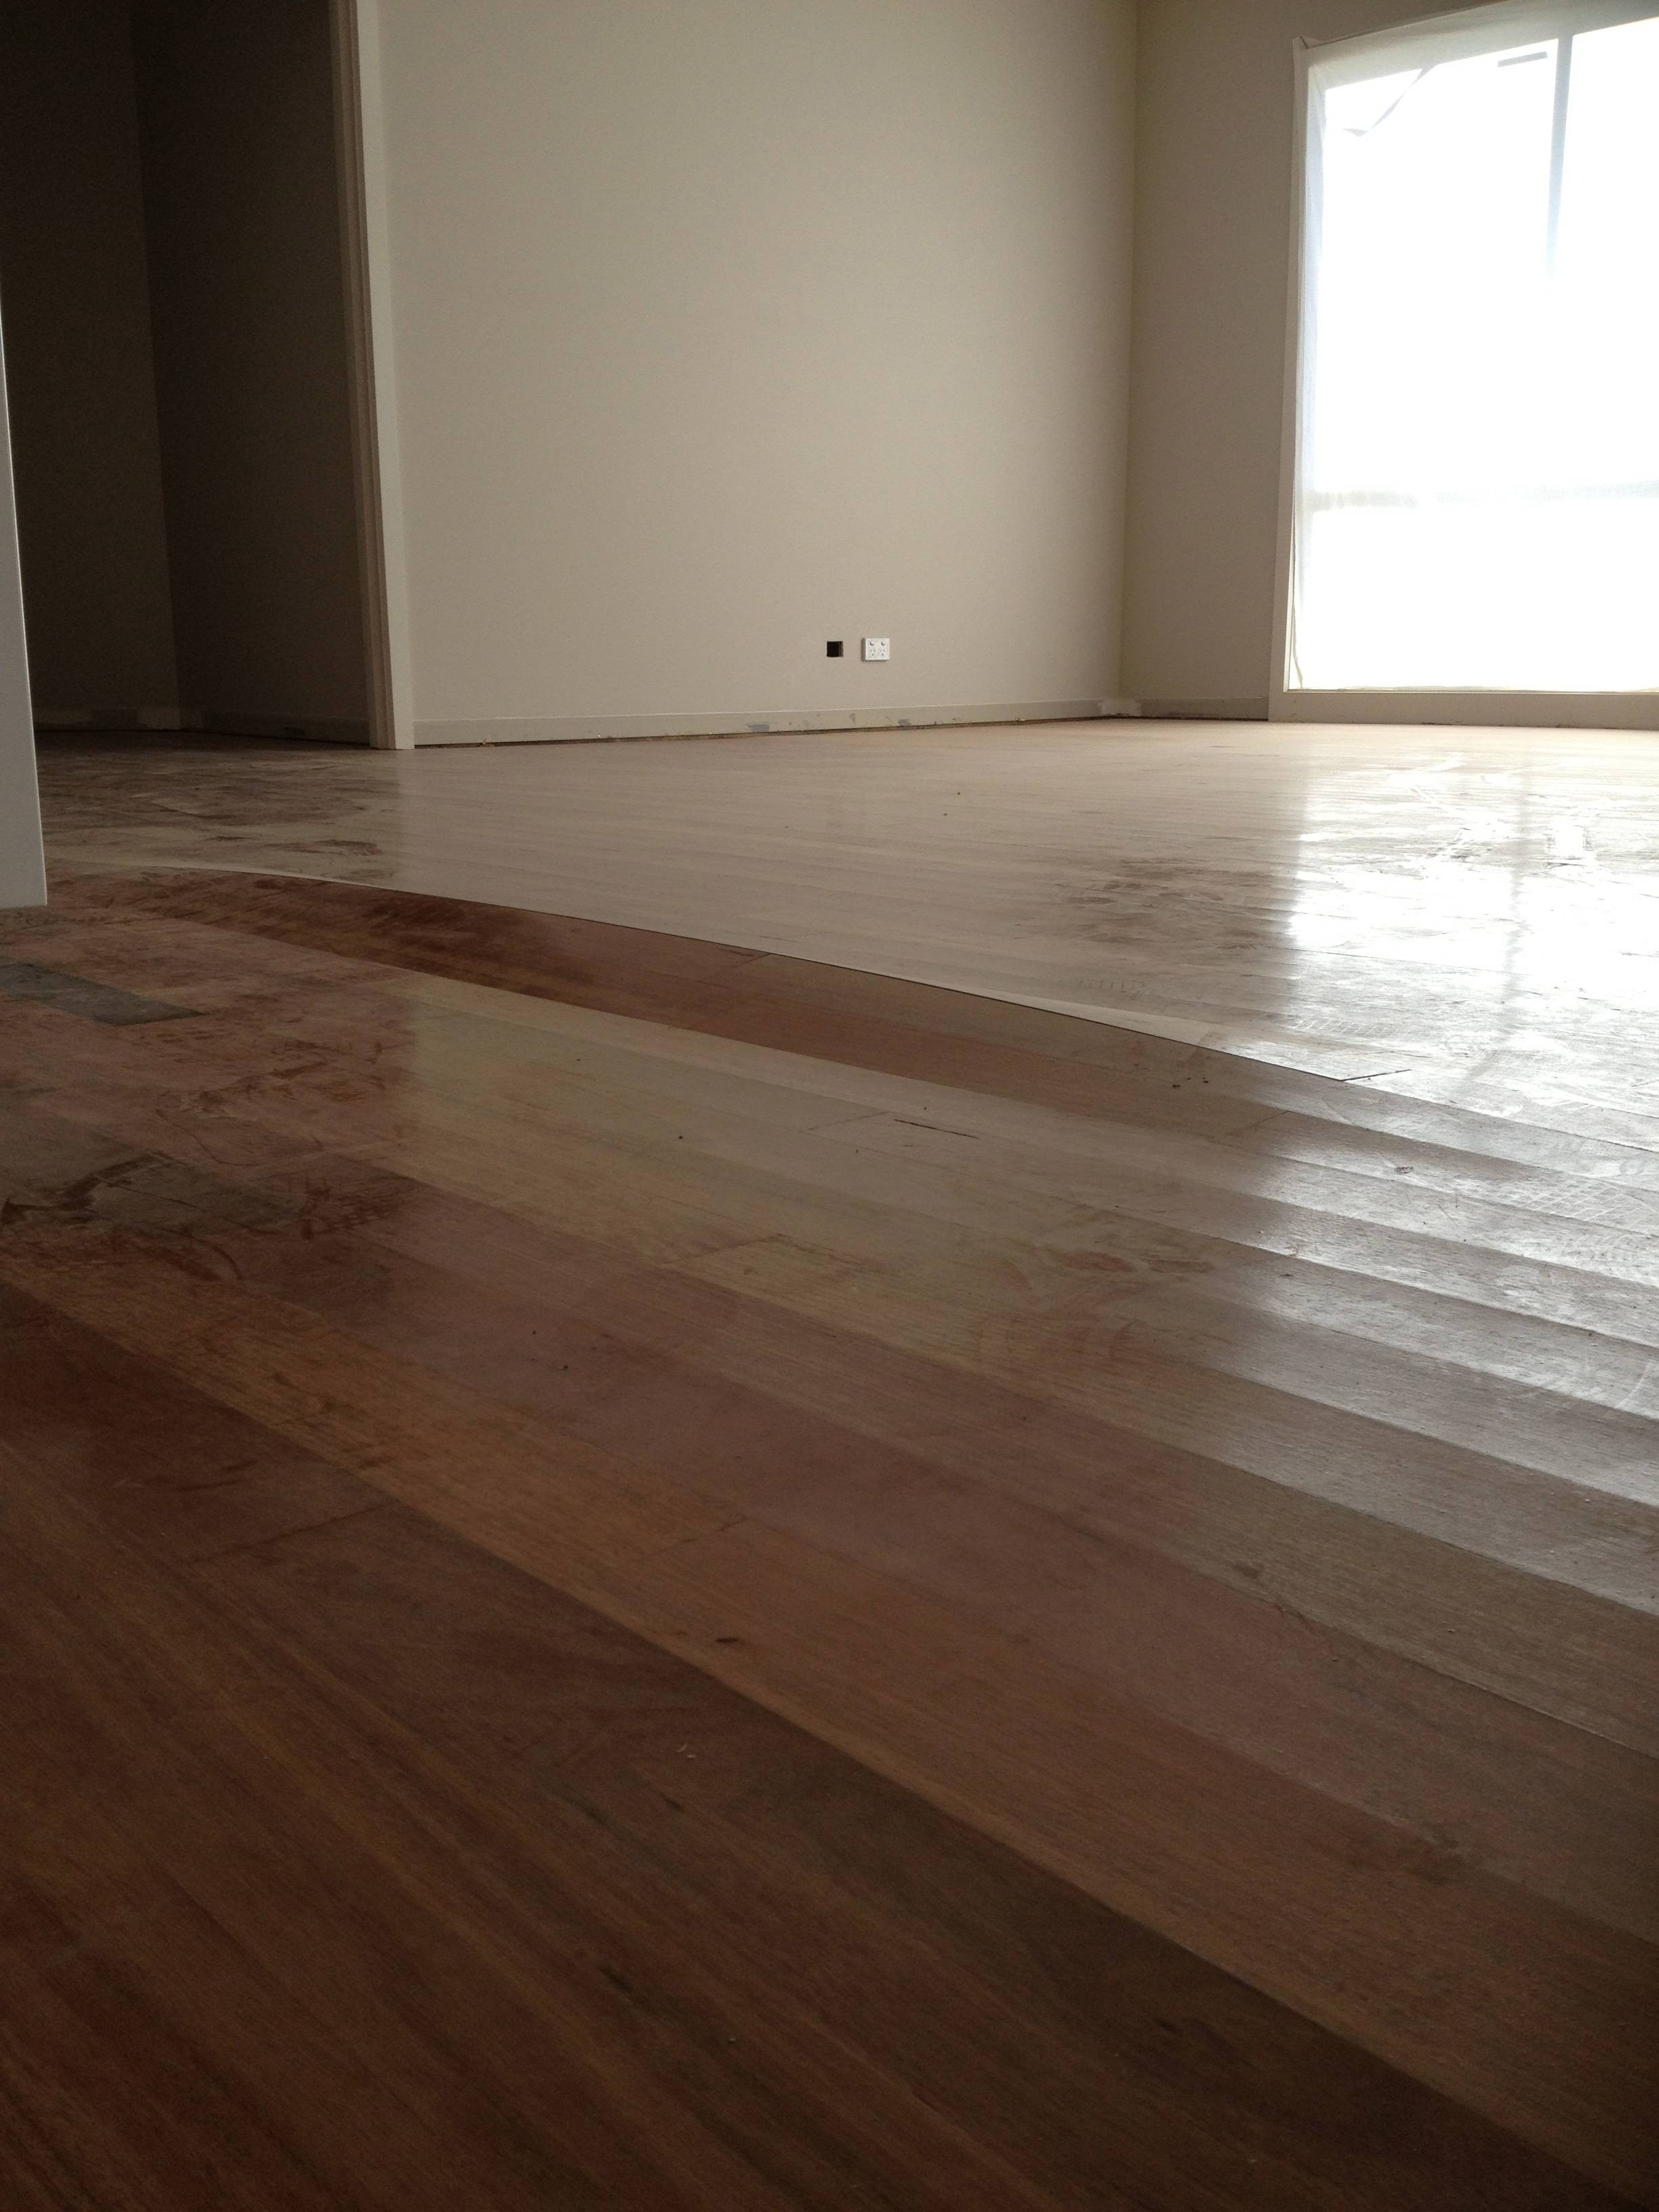 21 Awesome Filling Large Gaps In Hardwood Floors 2024 free download filling large gaps in hardwood floors of how to fix laminate flooring that is buckling floor regarding how to fix laminate flooring that is buckling how to rid of moisture in hardwood floori